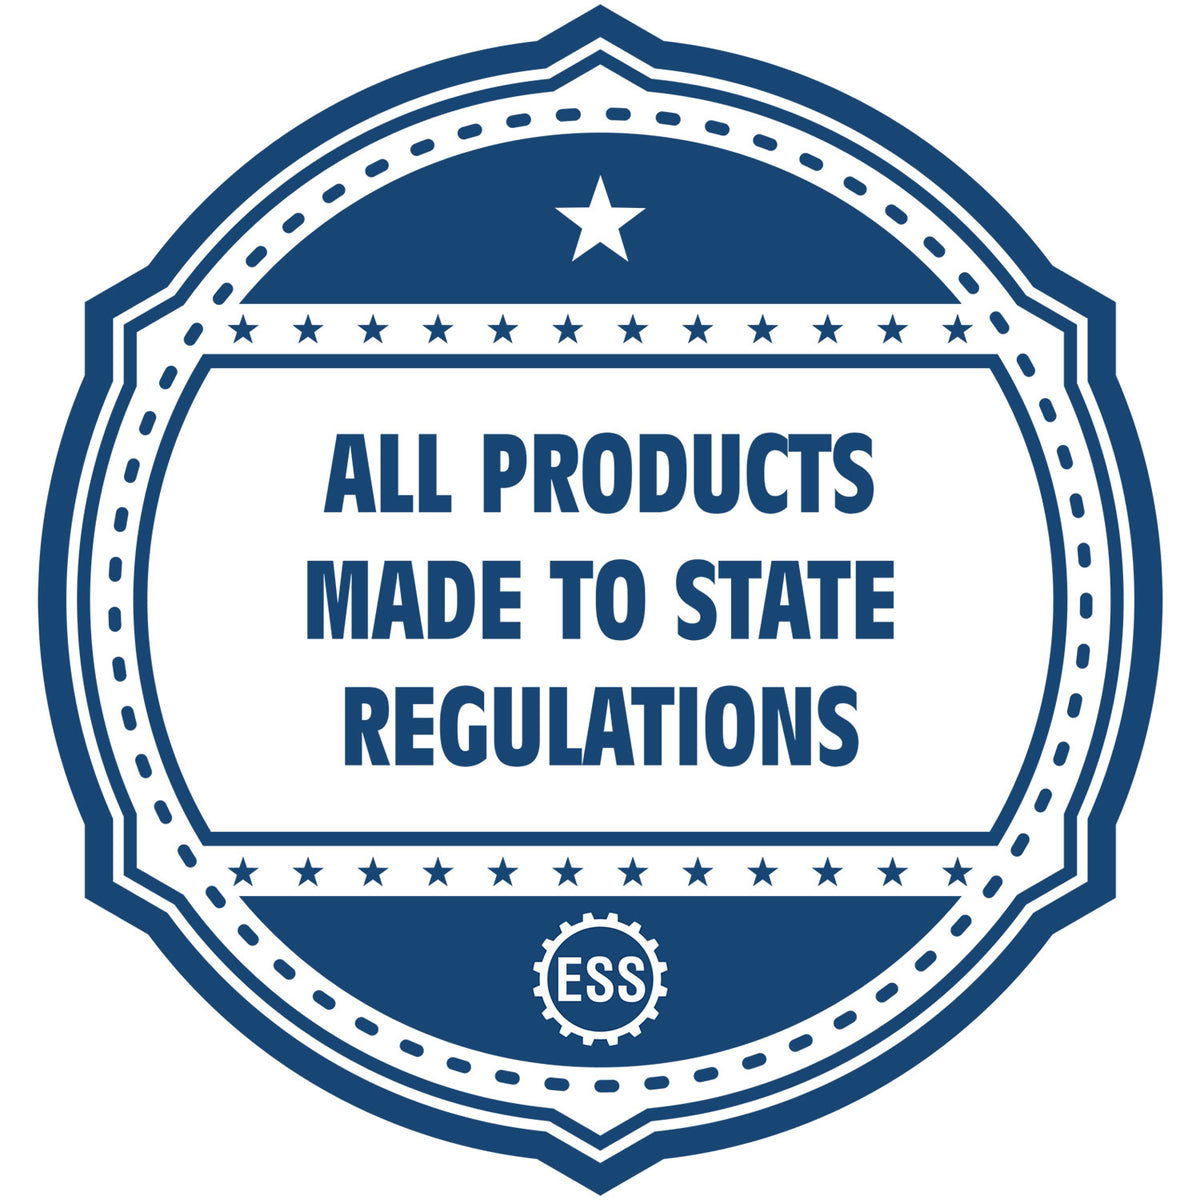 An icon or badge element for the PSI Montana Notary Stamp showing that this product is made in compliance with state regulations.